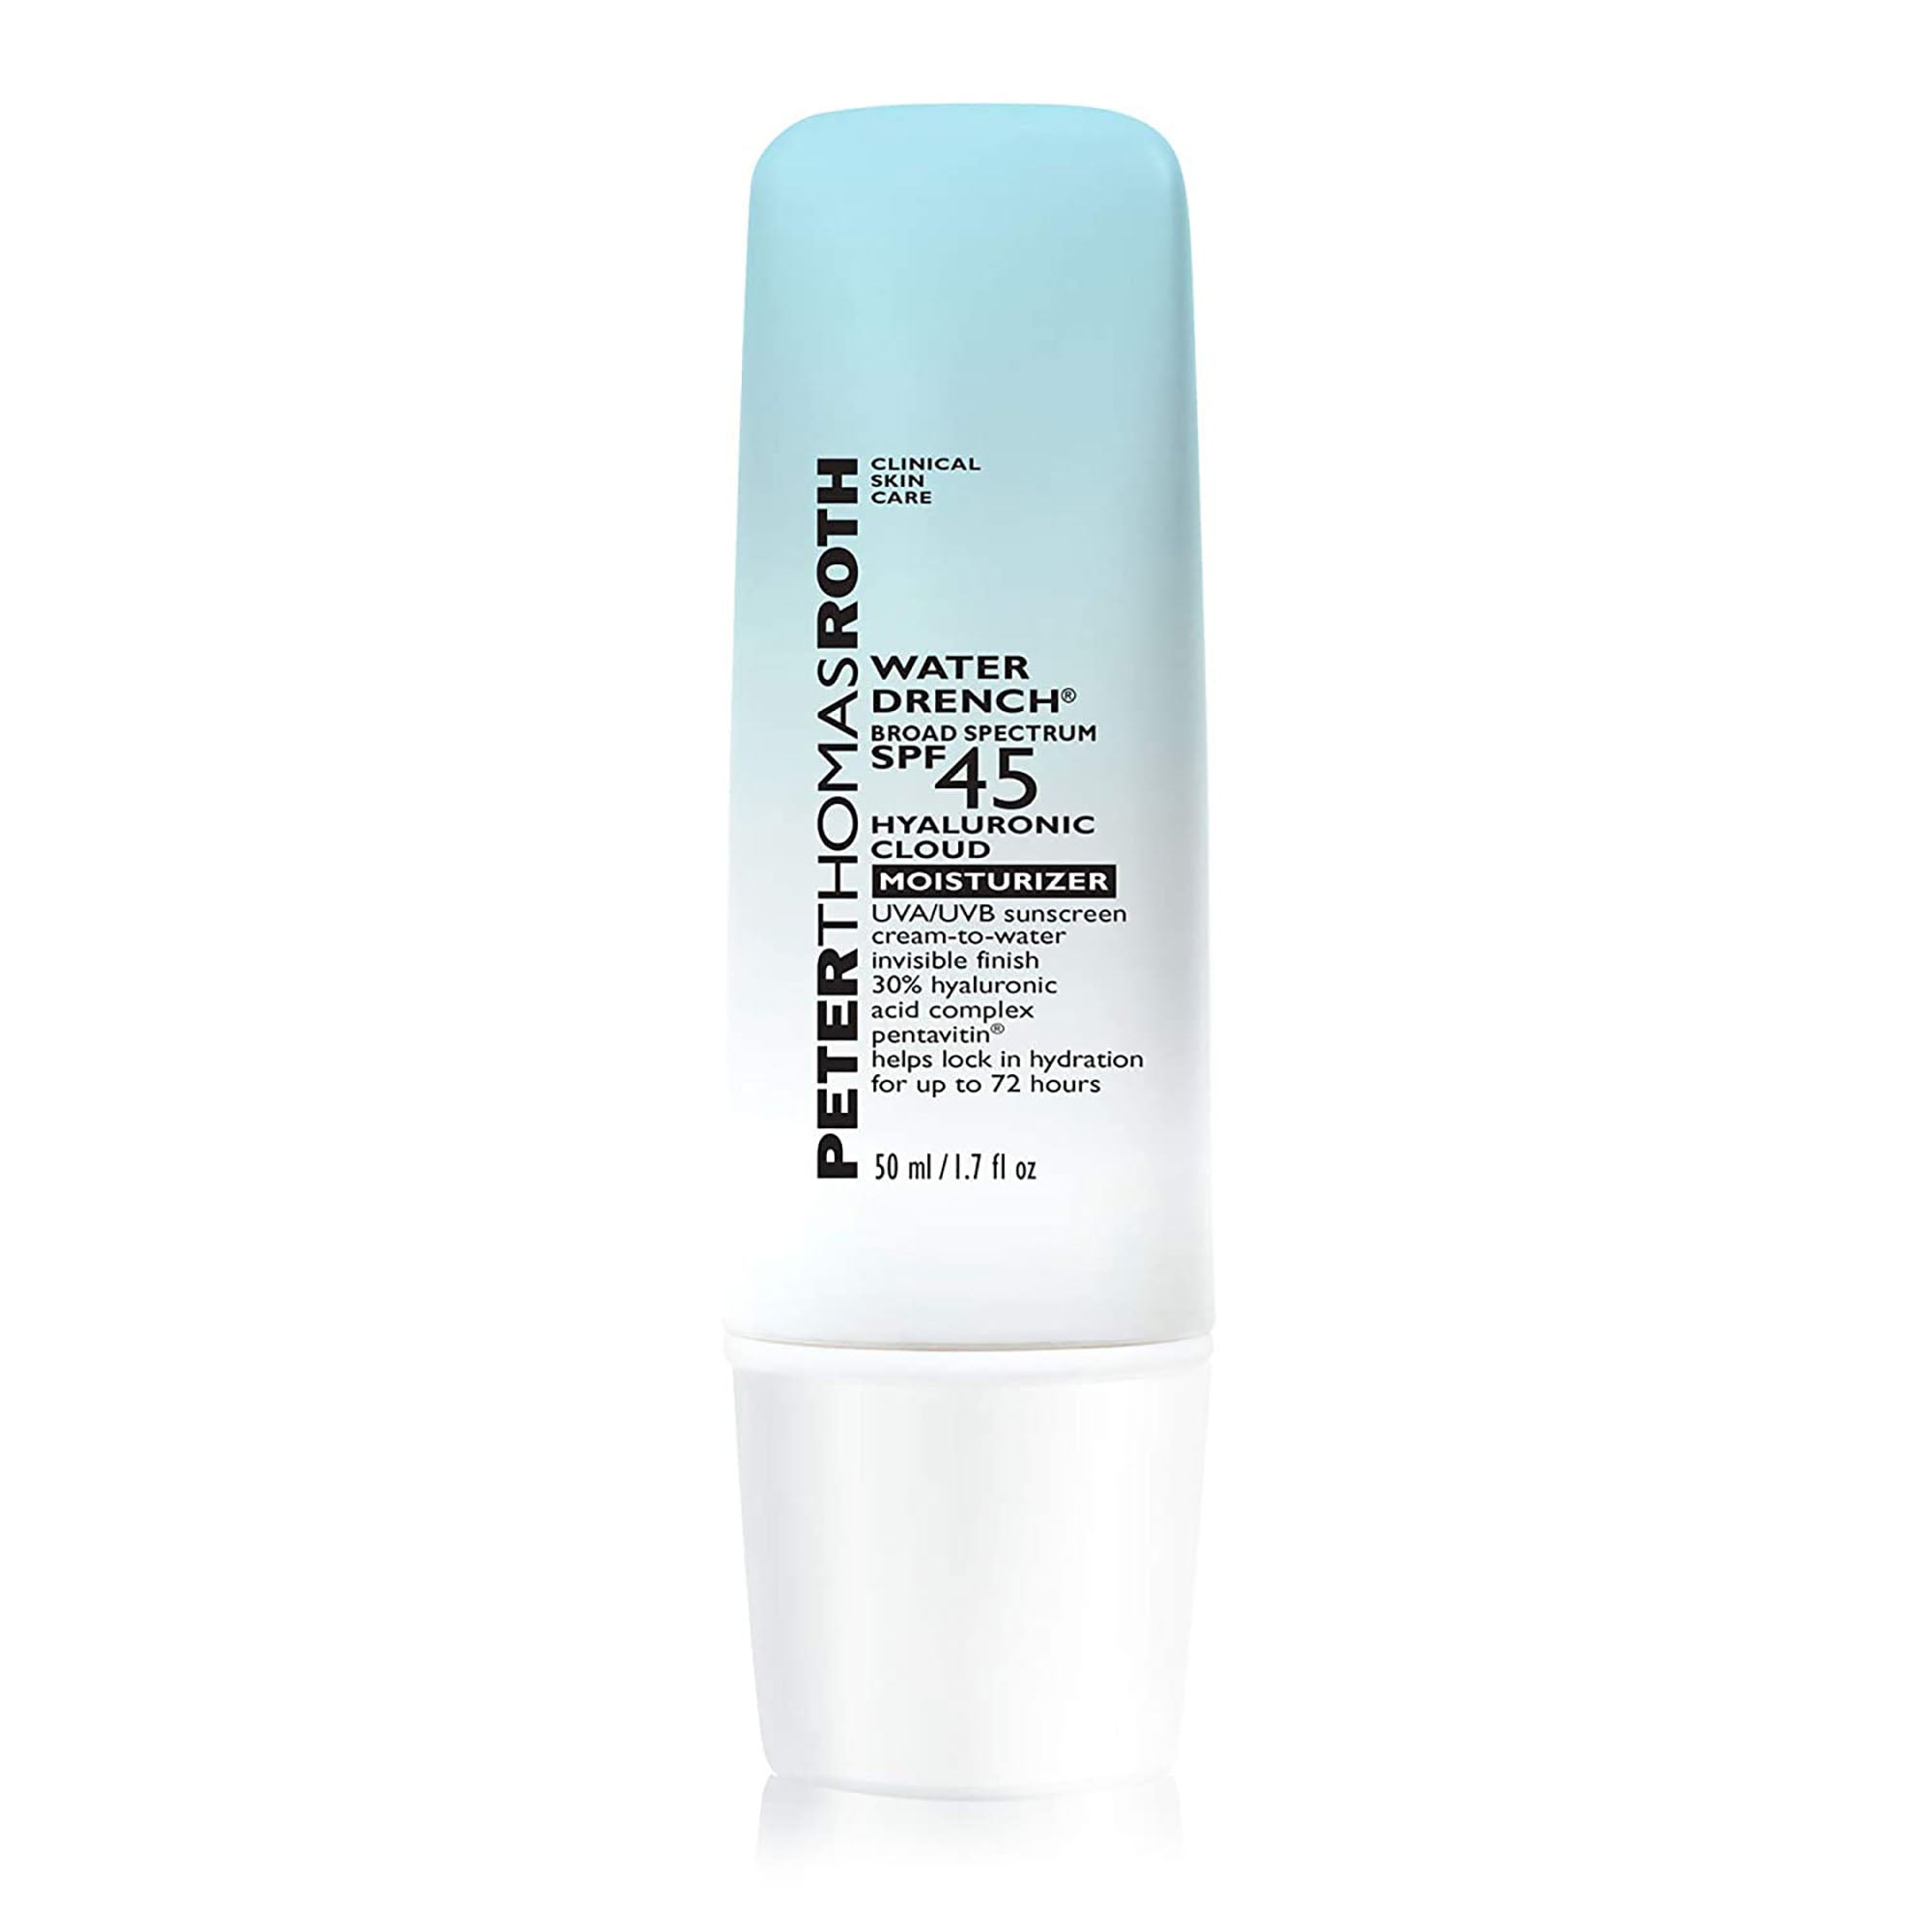 Peter Thomas Roth Water Drench Broad Spectrum SPF 45 Hyaluronic Cloud Moisturizer / 1.7OZ